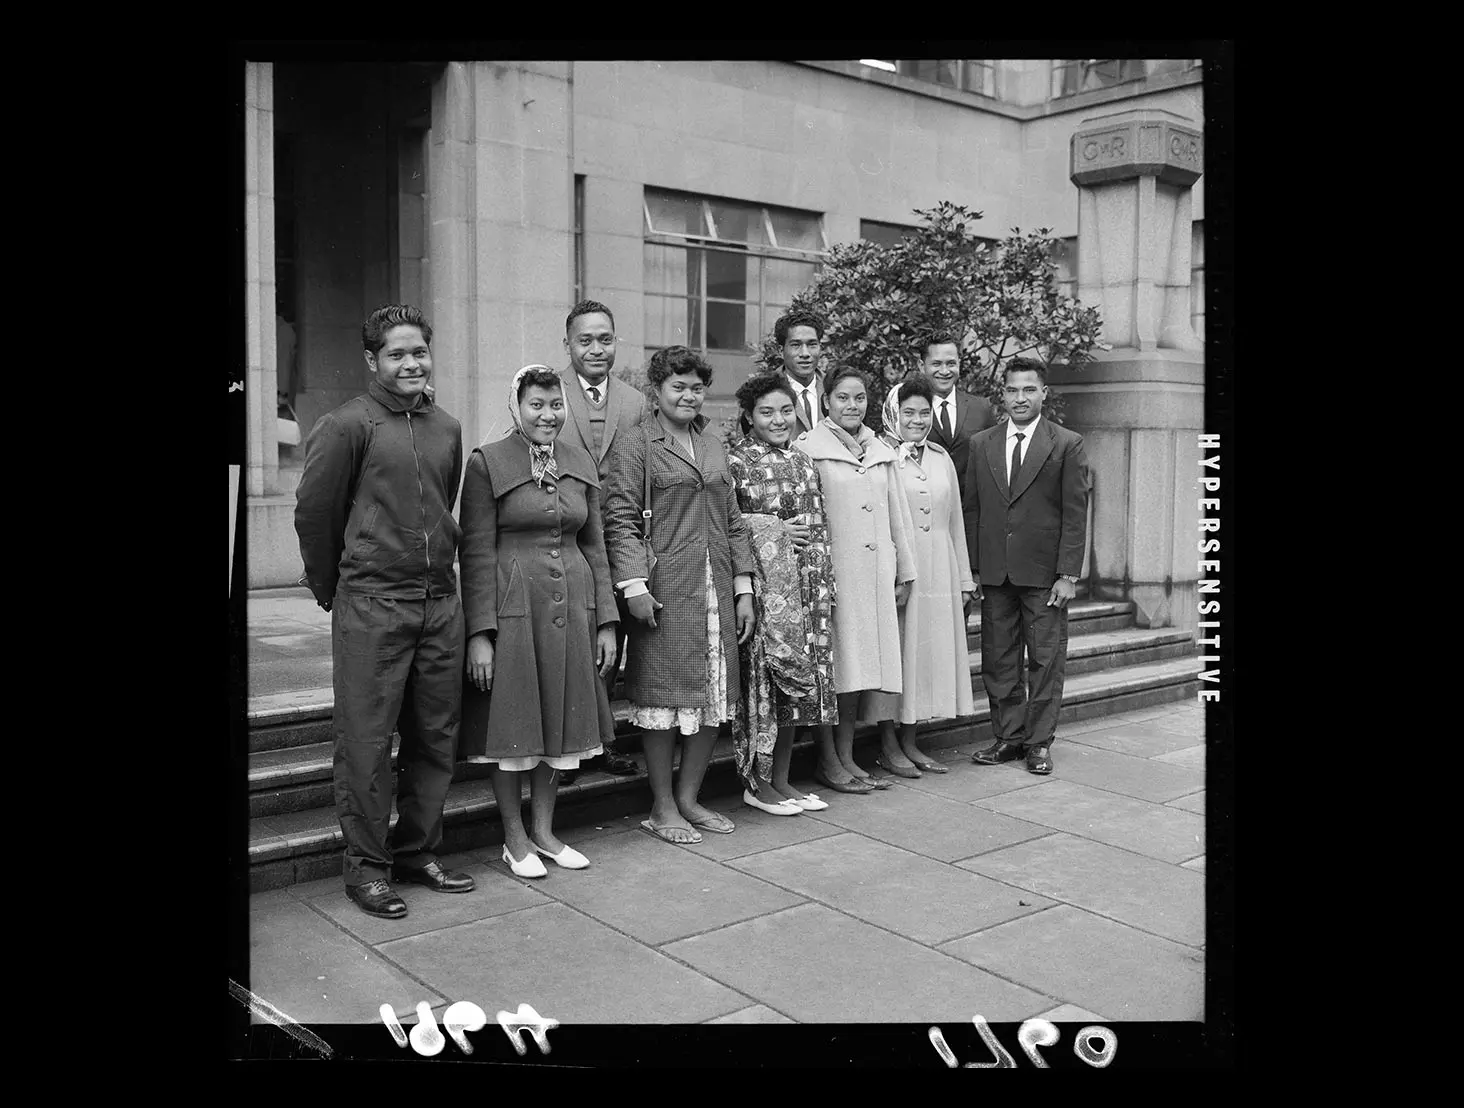 Group of young men and women from the Tokelau Islands wearing coats and warm clothing standing in front of a building.